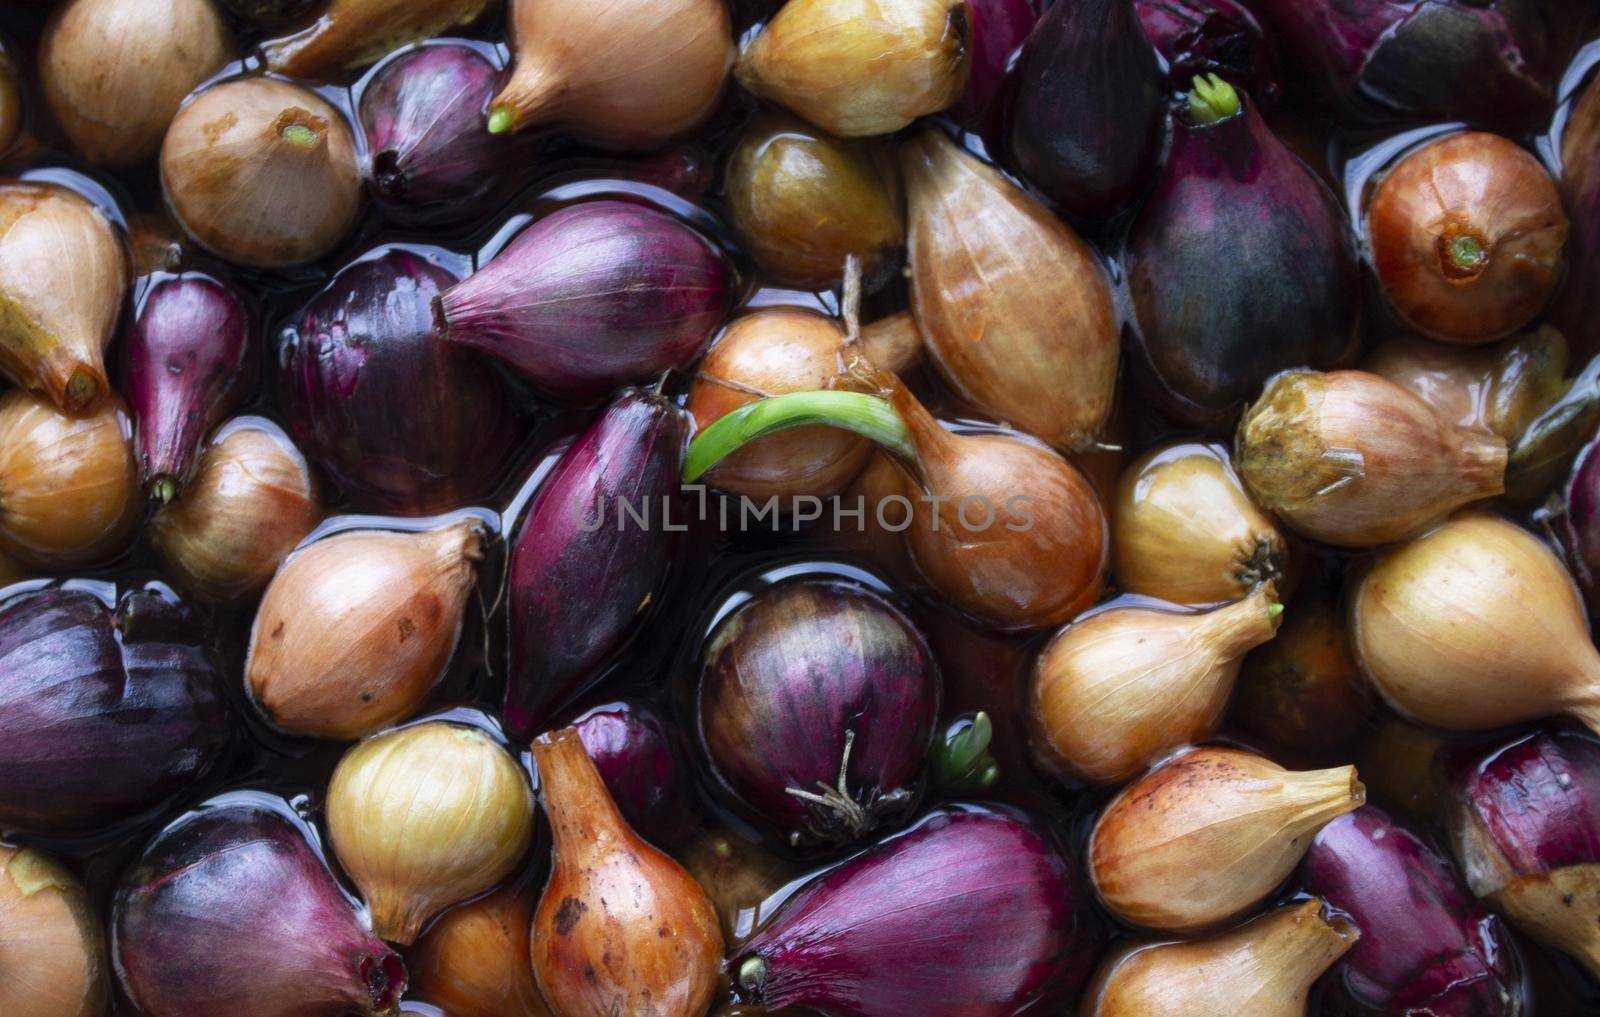 Yellow and purple onions, seedlings, Background of growing onions. There are many growing onion plantations. Rural herbs and vegetables. Sale at the farmer's market. pattern texture